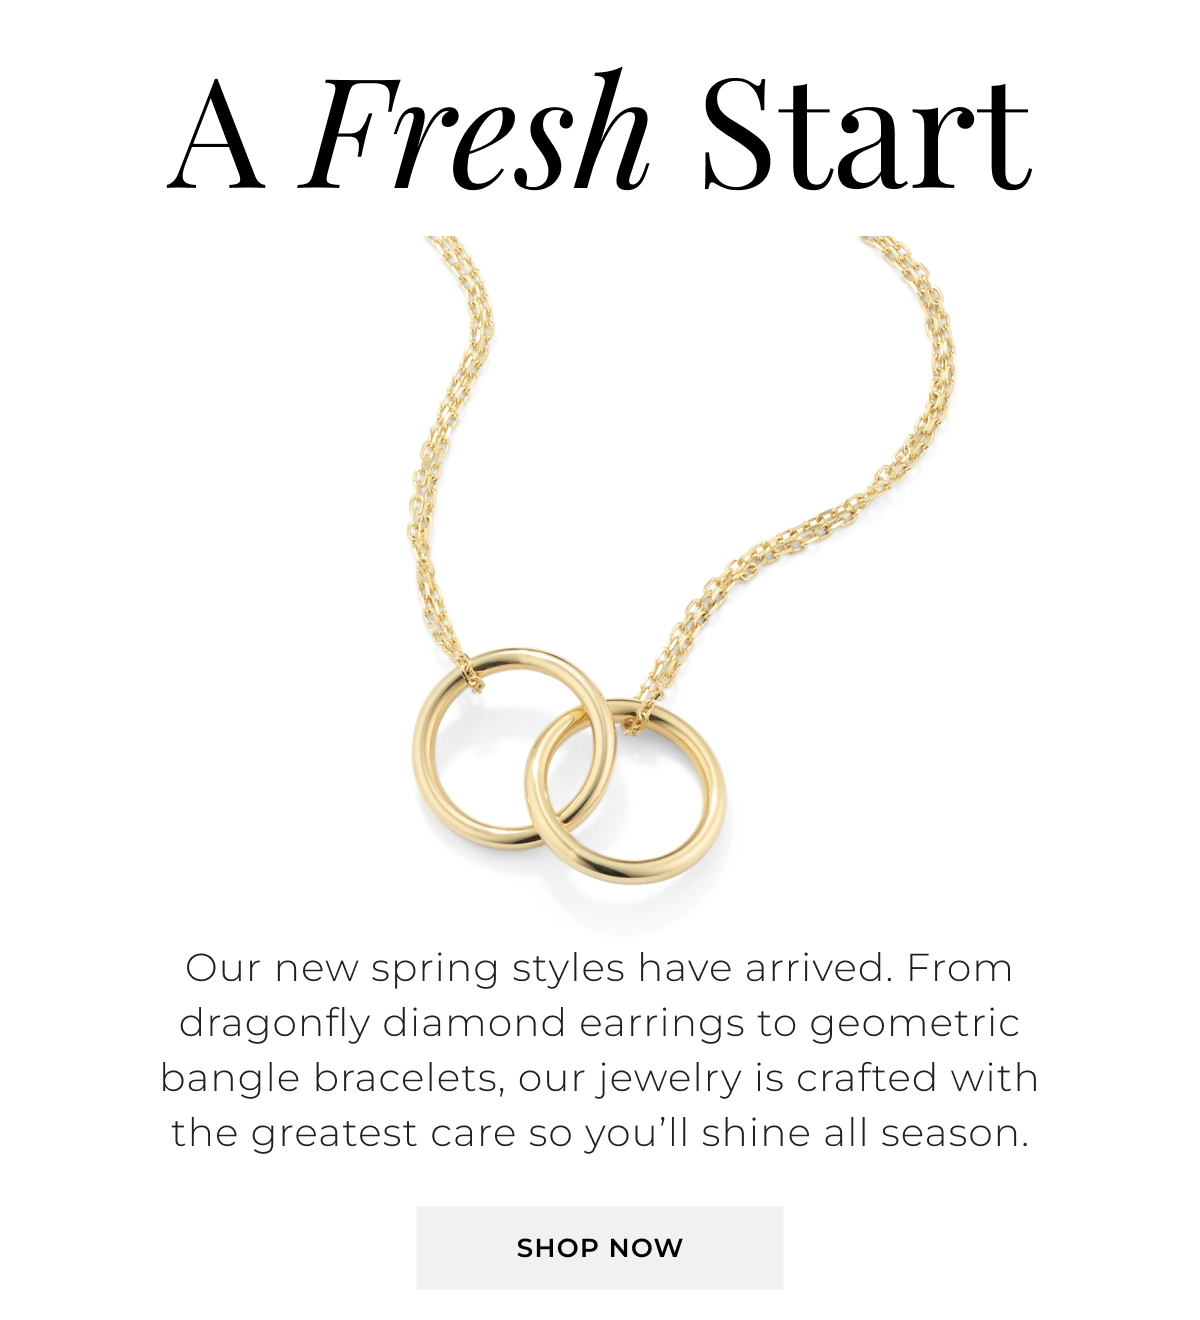 A Fresh Start - Our new spring styles have arrived. From dragonfly diamond earrings to geometric bangle bracelets, our jewelry is crafted with the greatest care so youll shine all season. Shop Now >